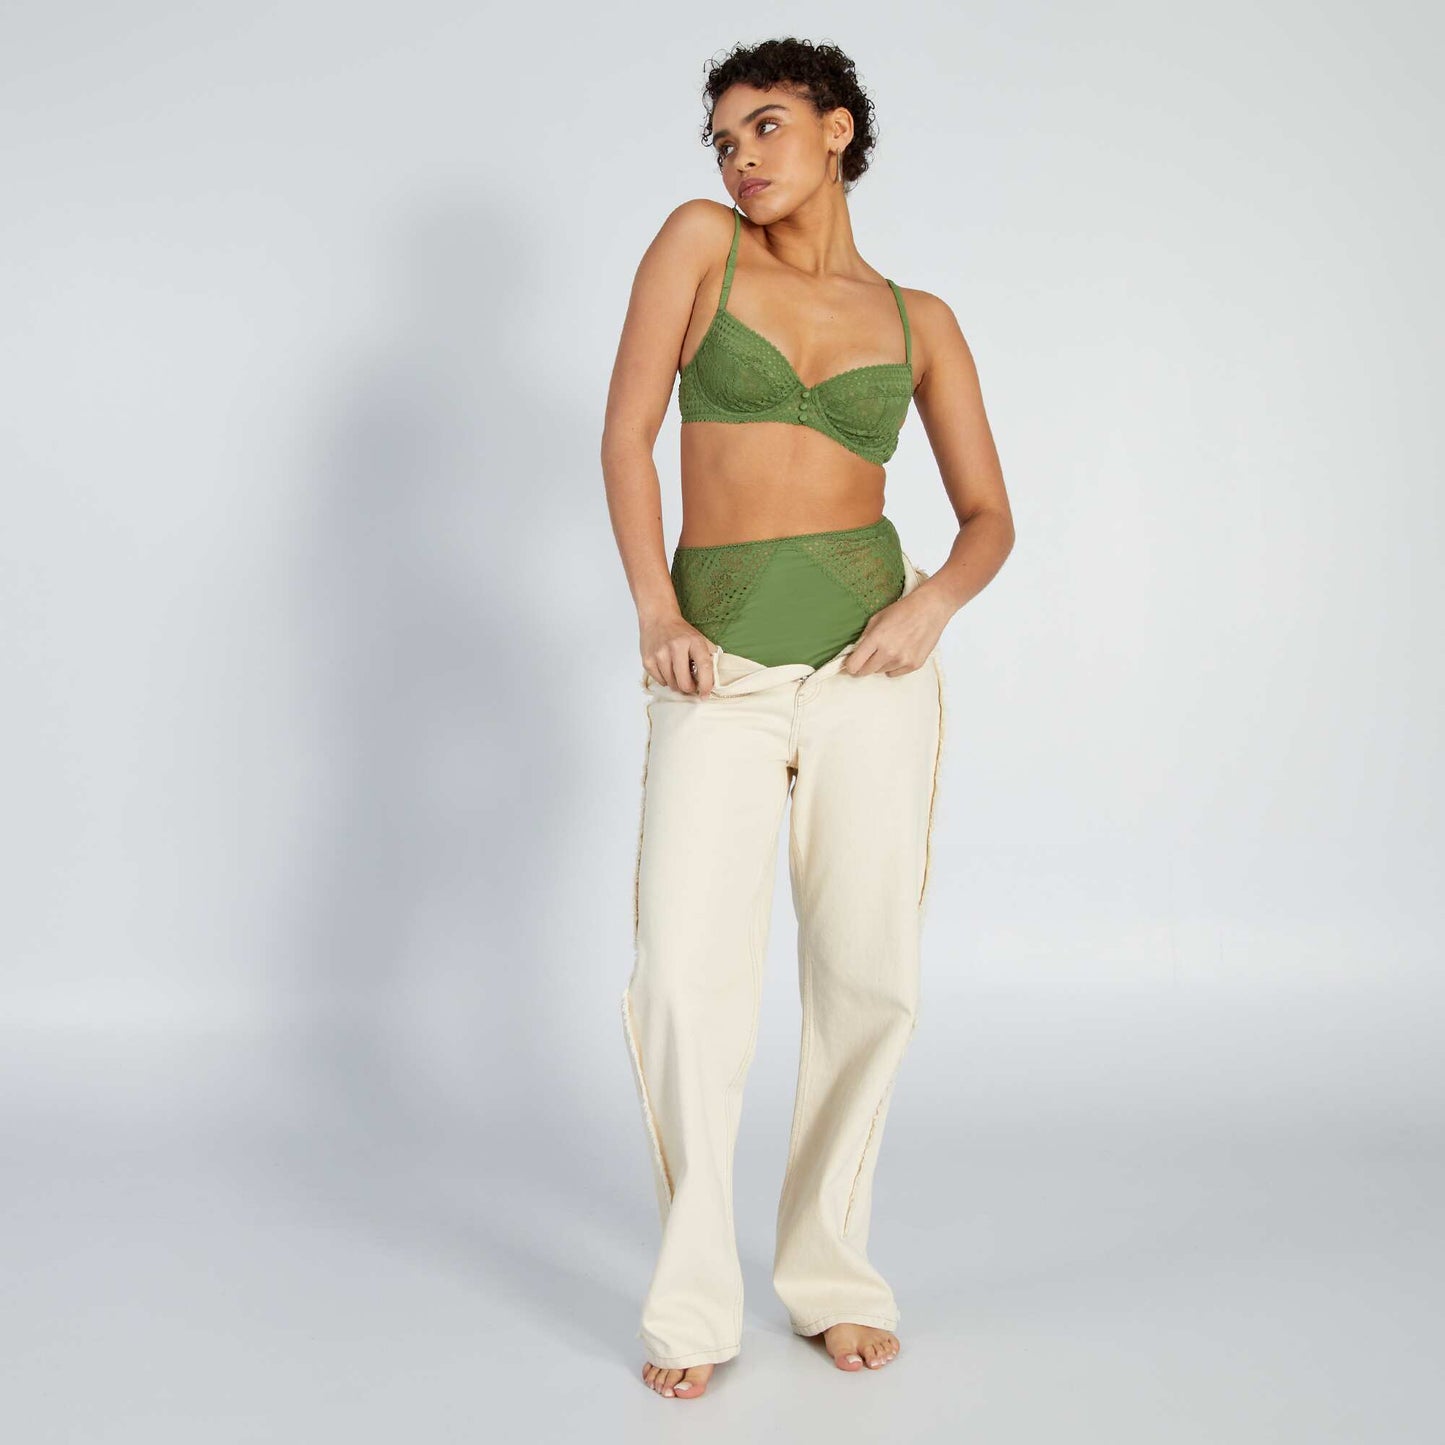 High-waisted lace tanga briefs DILL GREEN